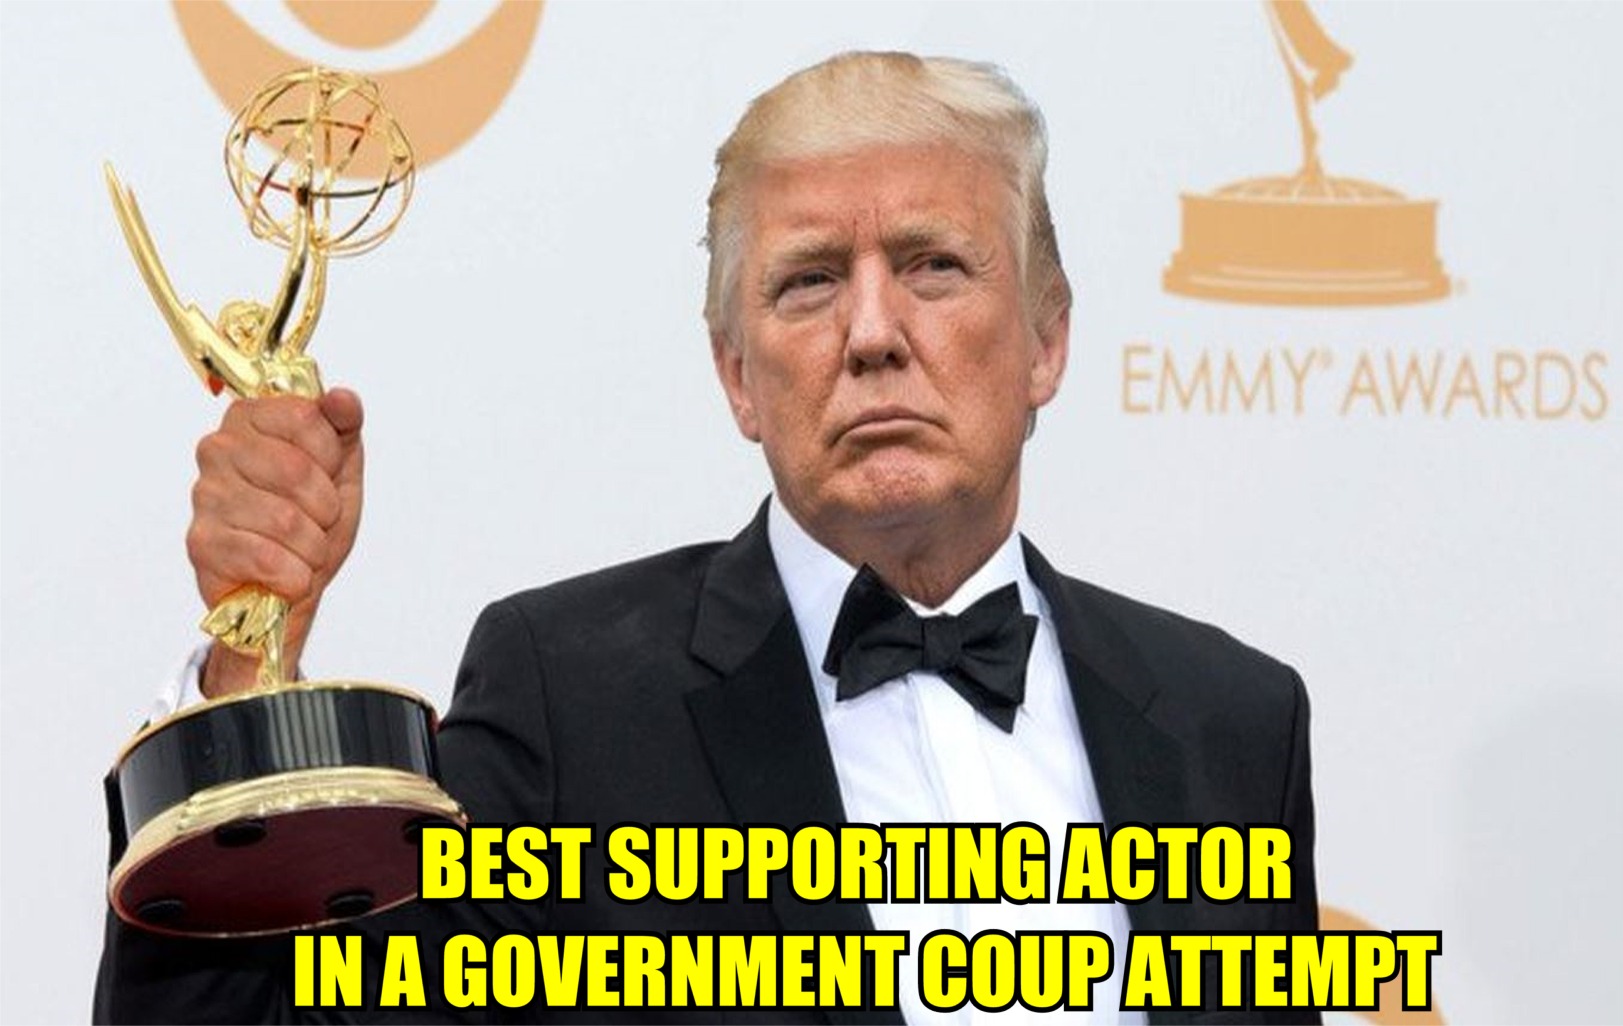 photo caption - Emmy Awards Best Supporting Actor In A Government Coupattempt